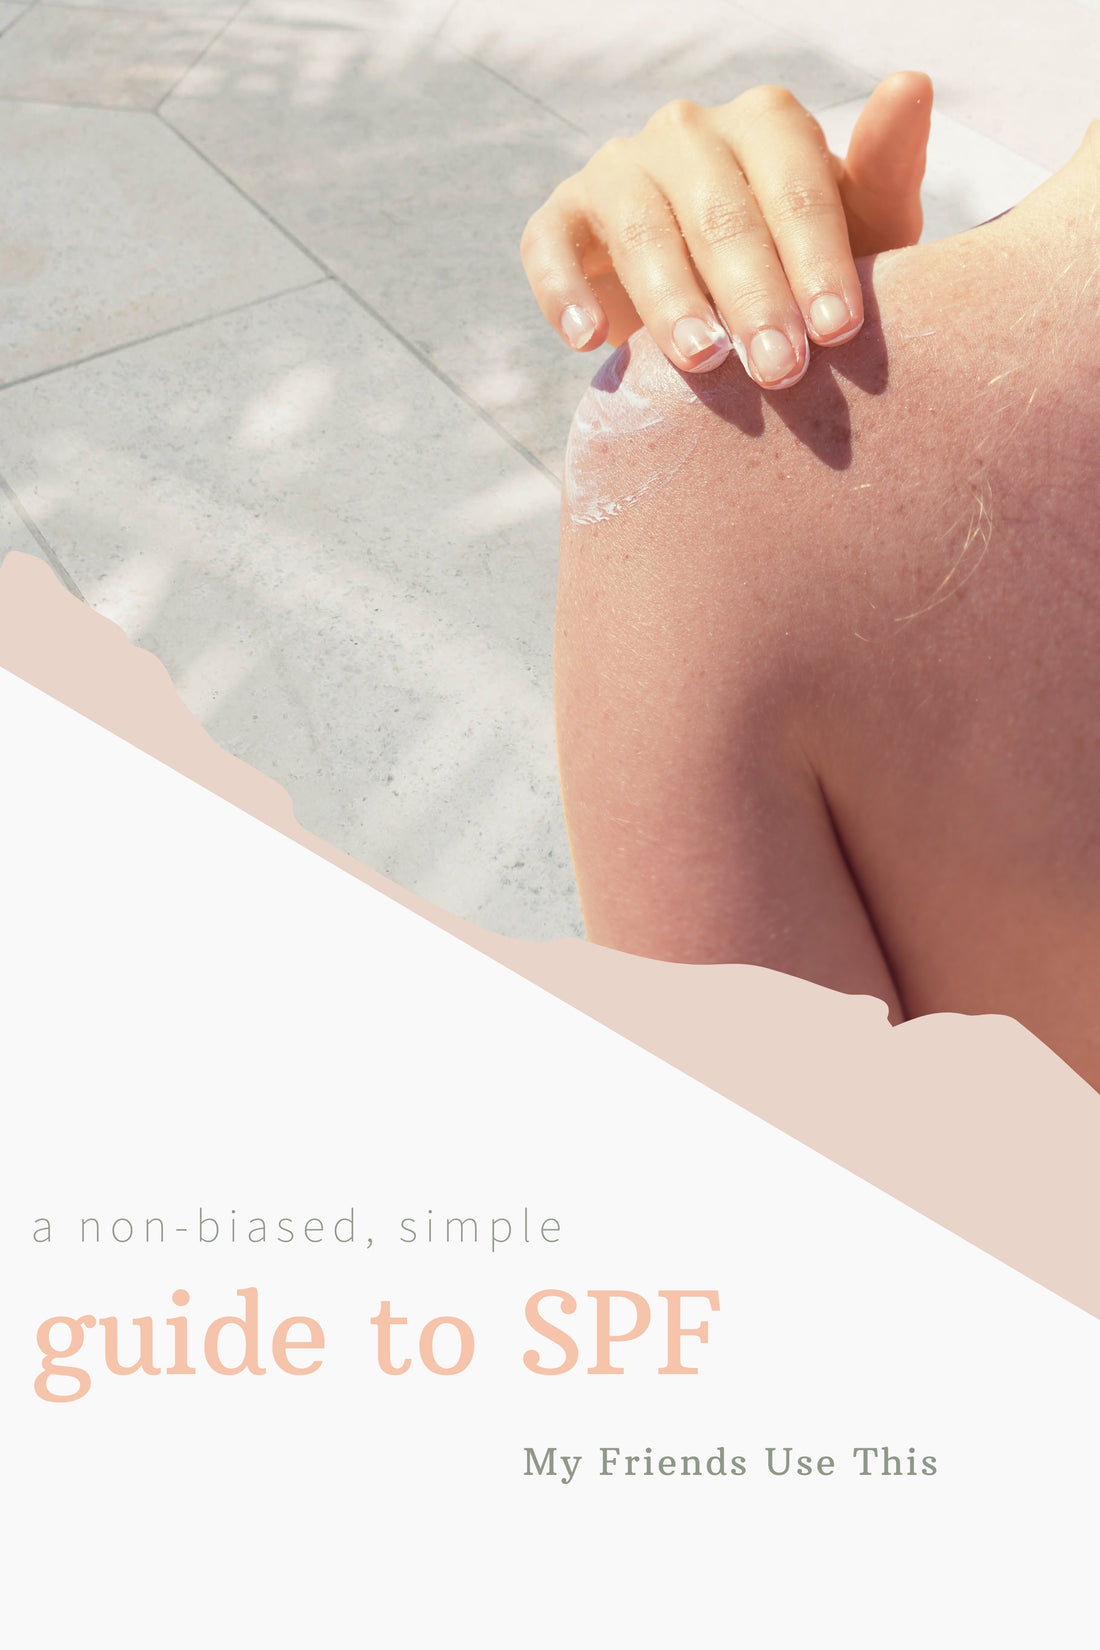 a non-biased, simple guide to SPF